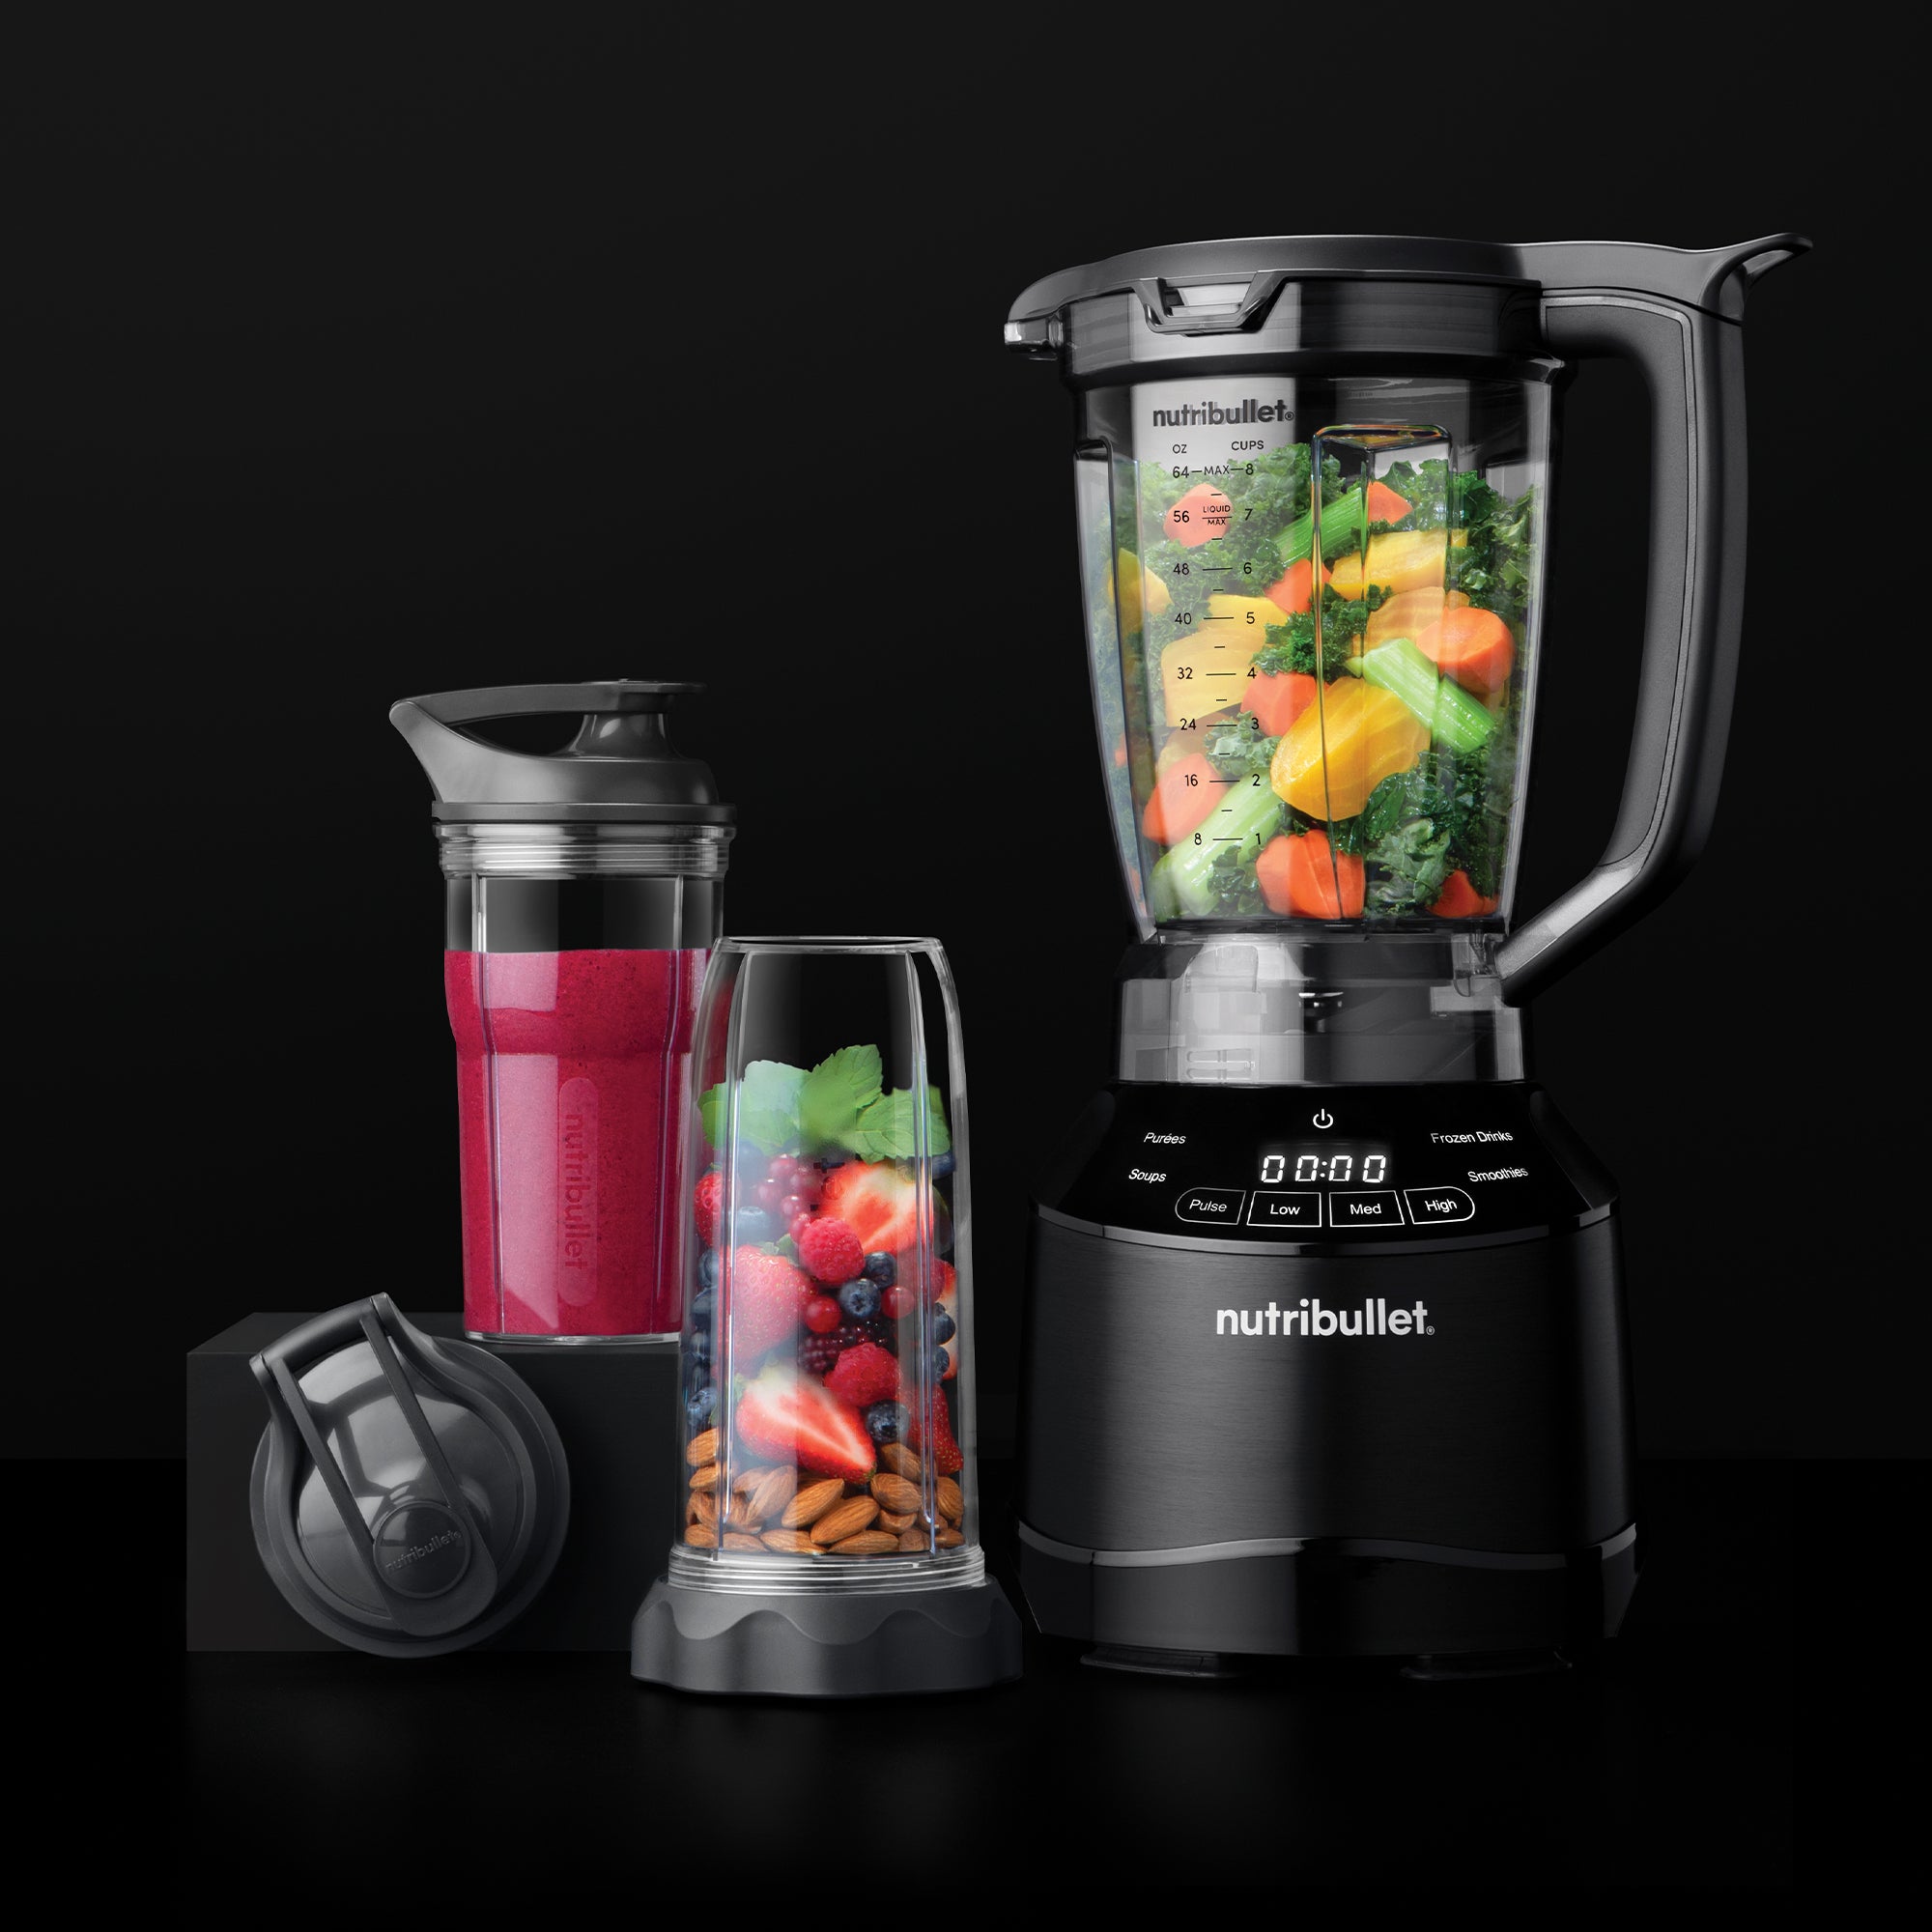 Nutribullet Magic Bullet Kitchen Express Food Processor Review - Reviewed